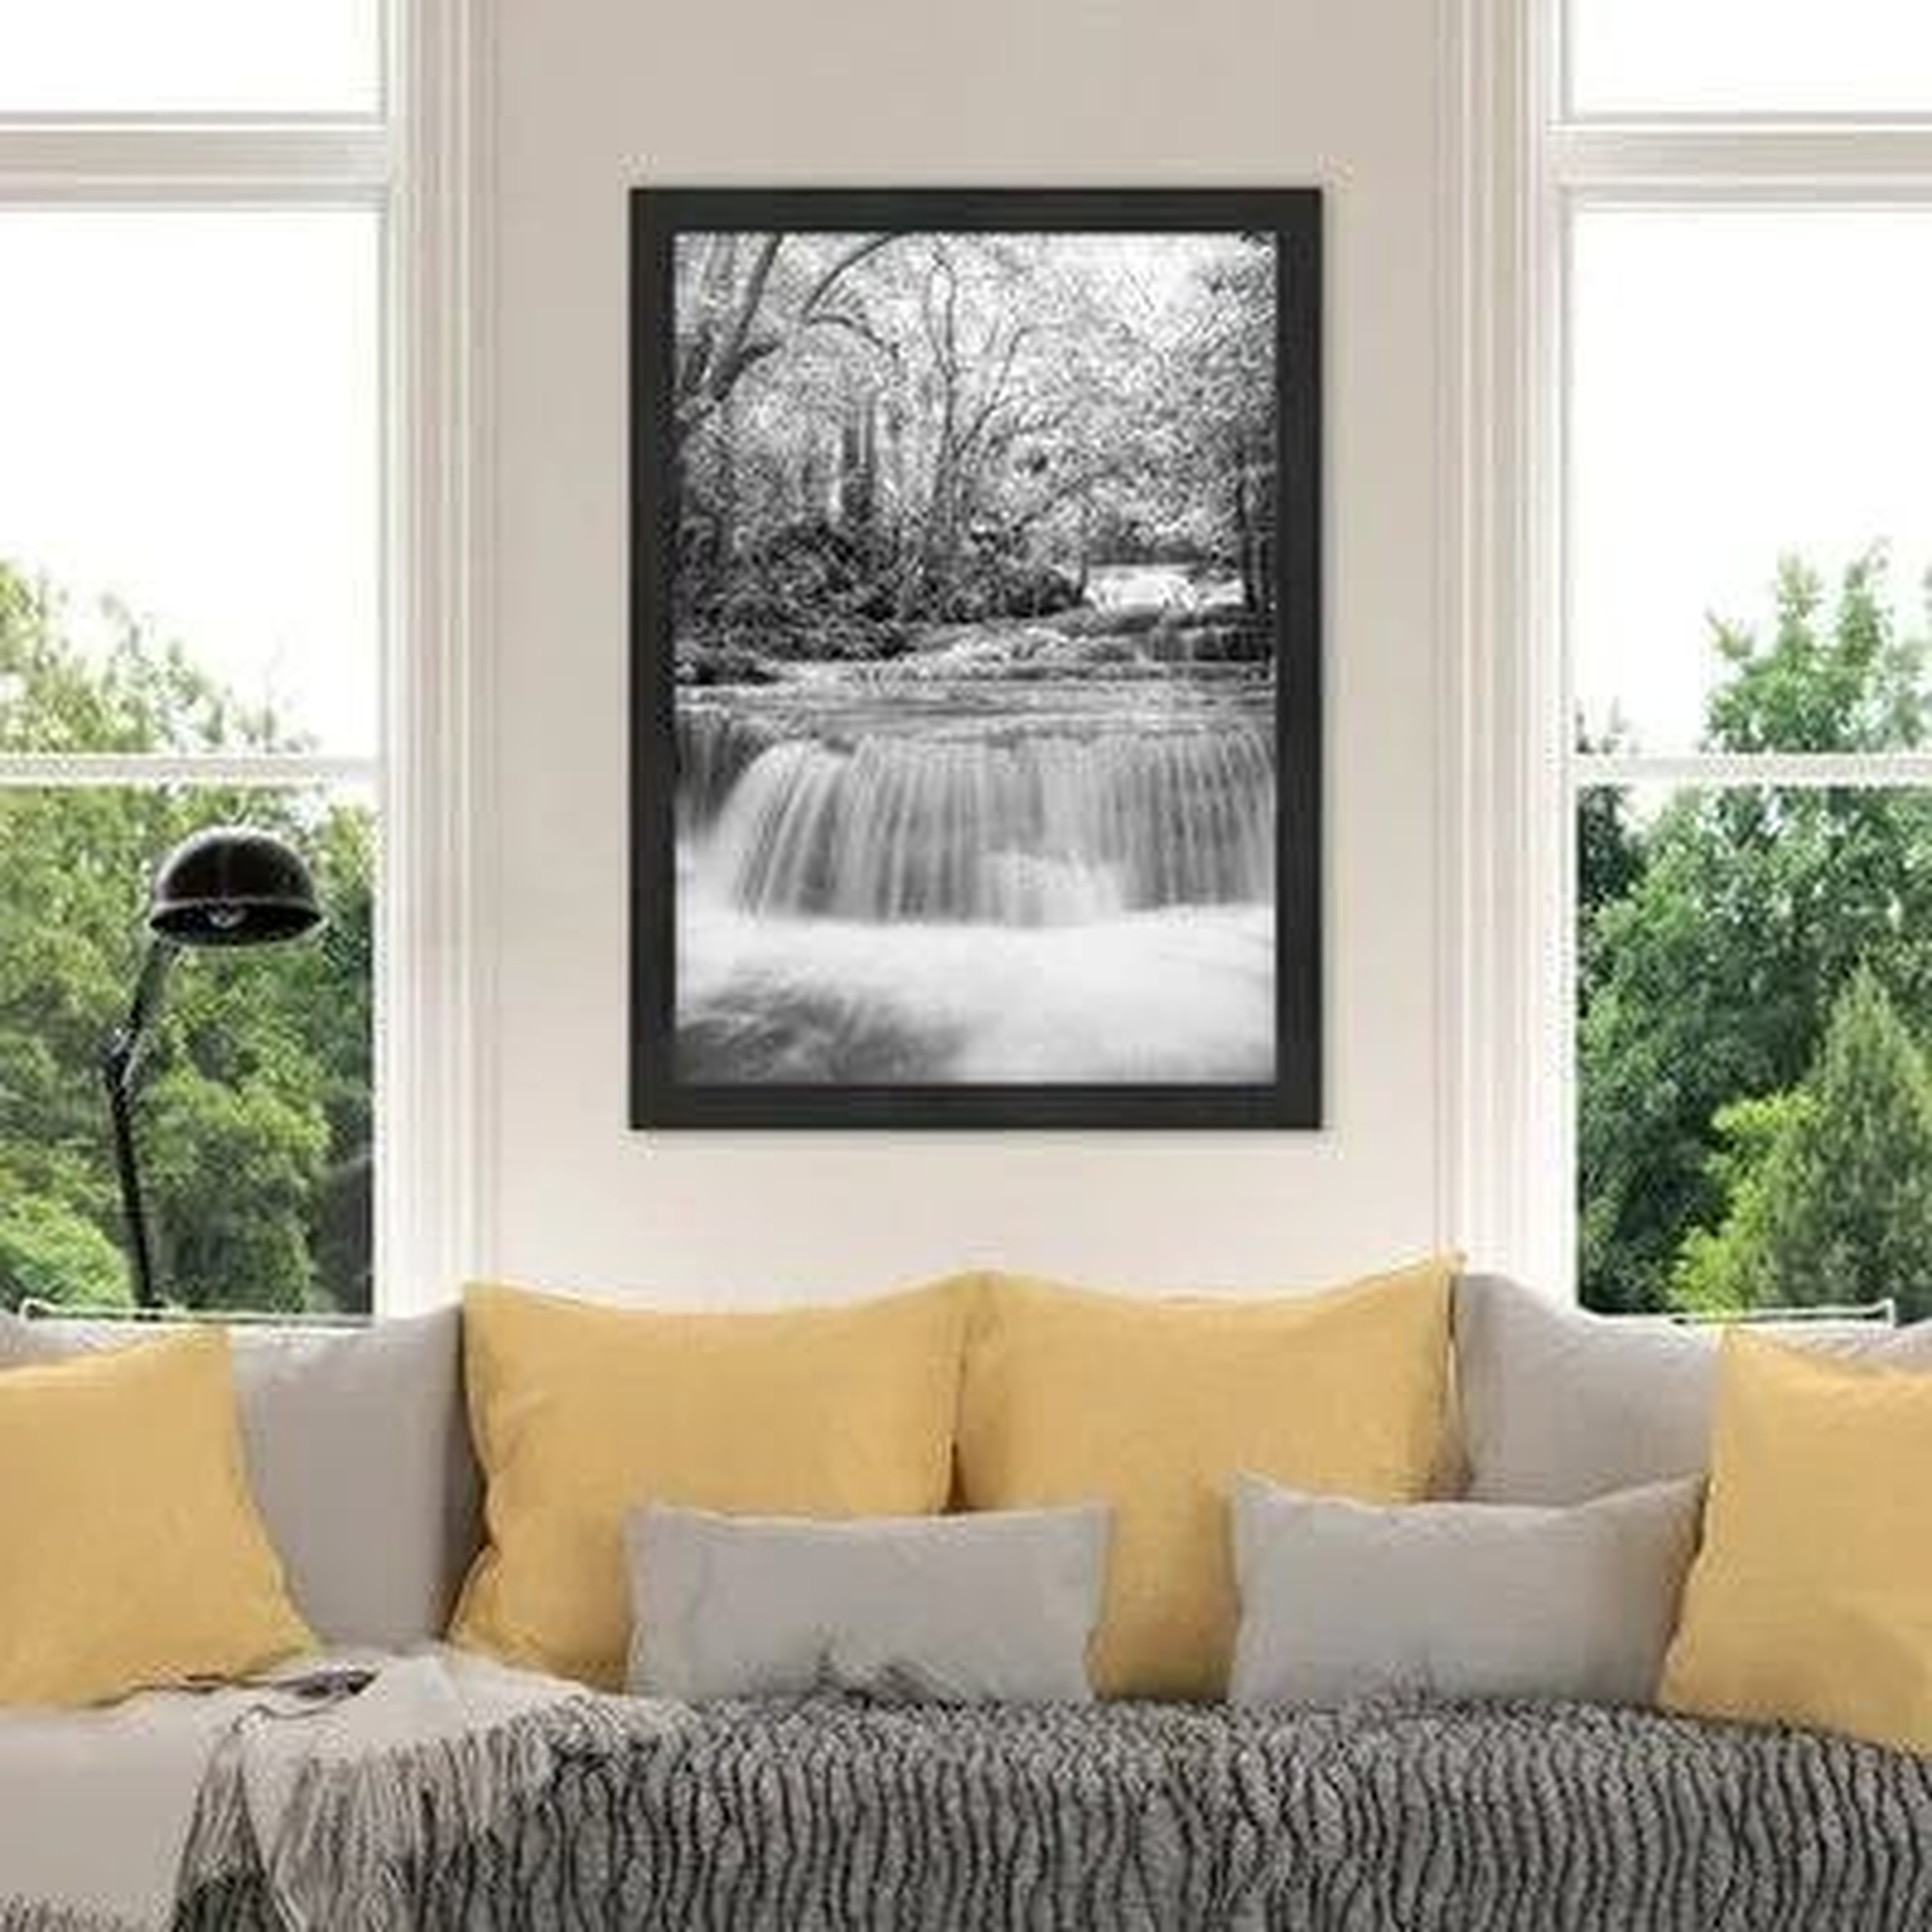 Wightman Poster Picture Frame 24"x36", Onyx - Wayfair